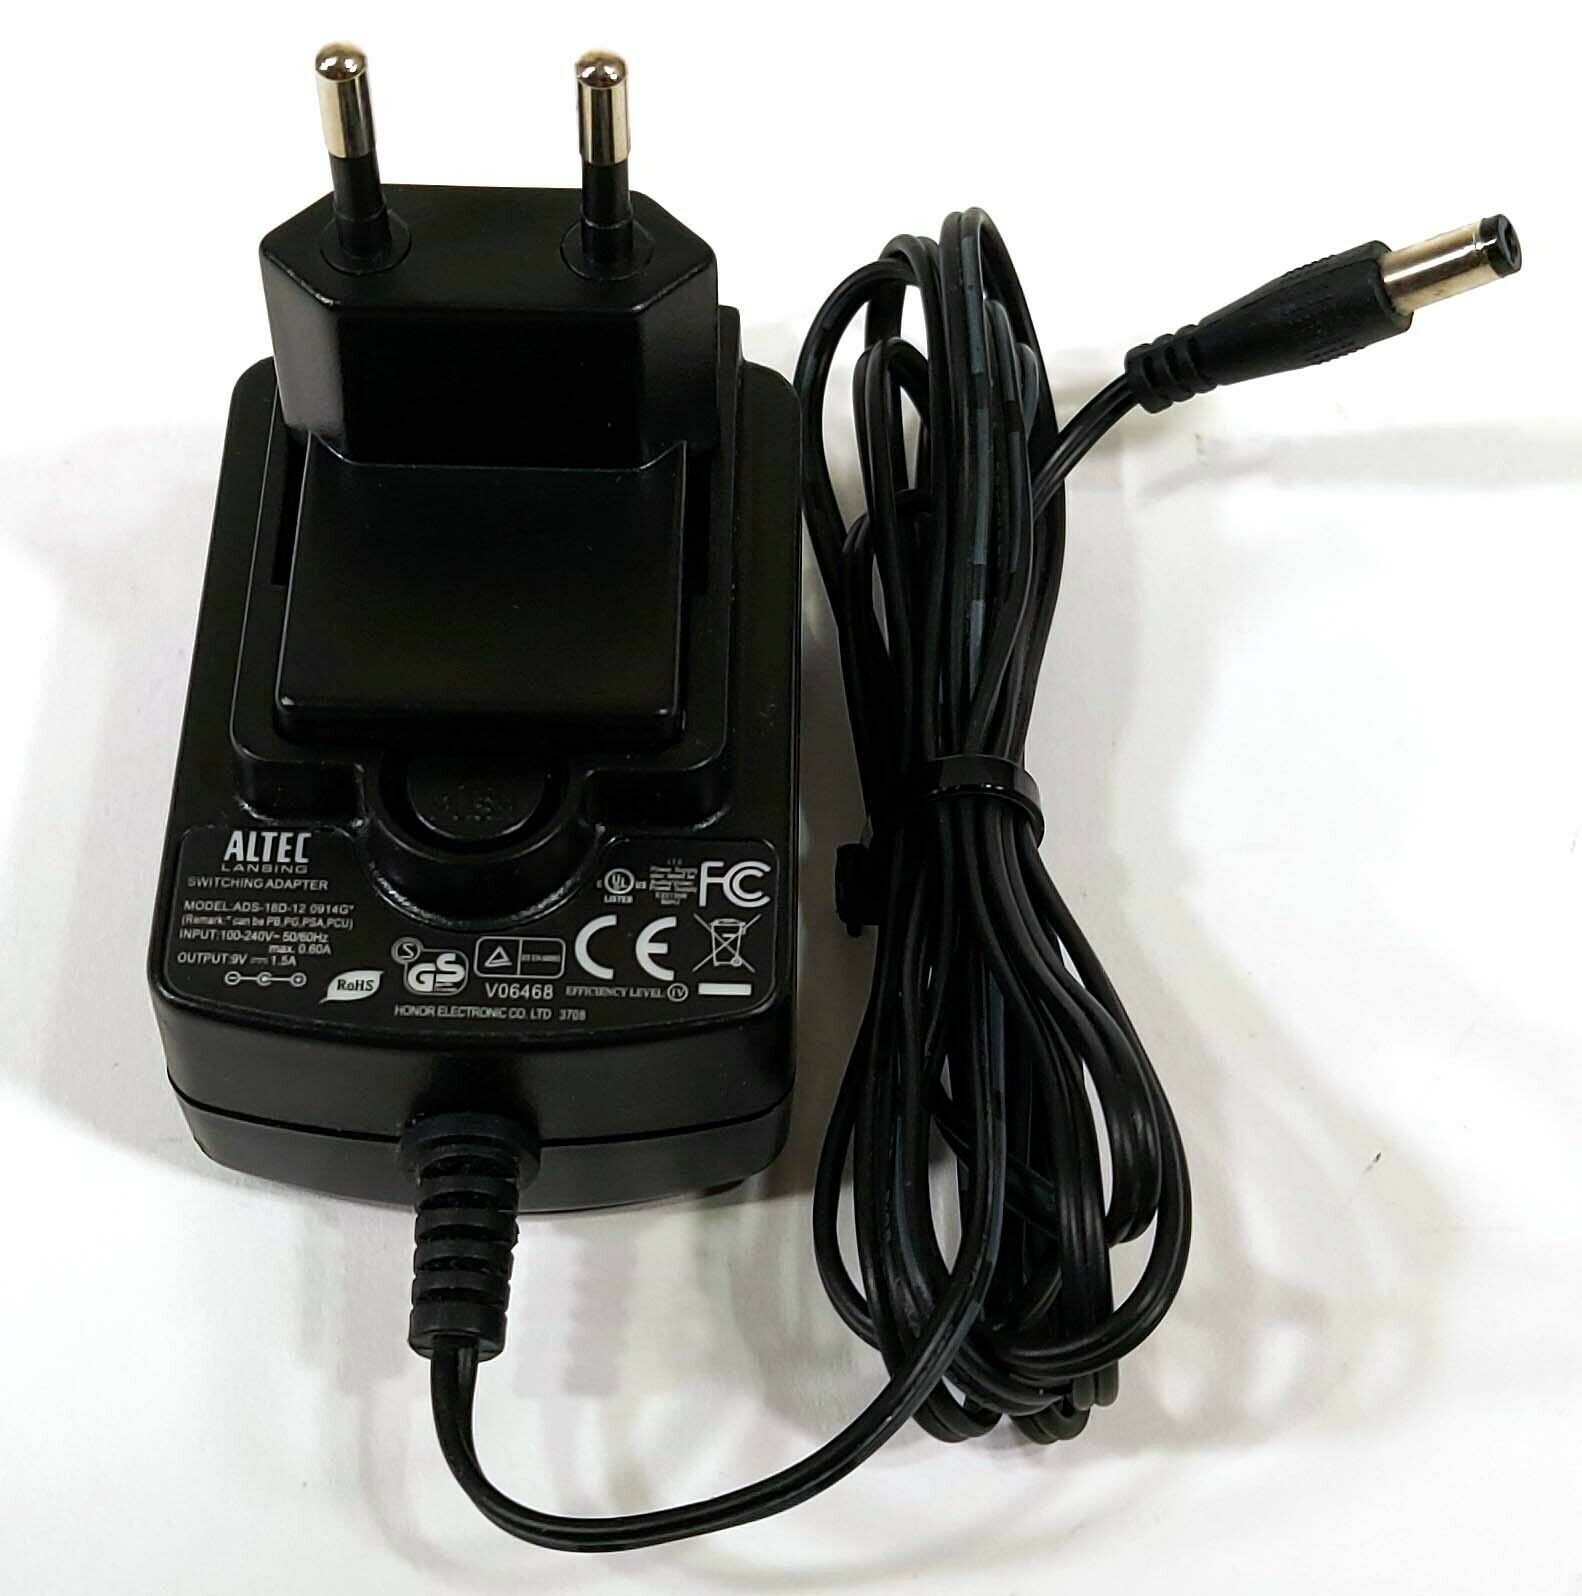 Honor ADS-18D-12 0914G Switching AC/DC Adapter 9V 1.5A Charger Europlug C168 Output Current: 1.5 A